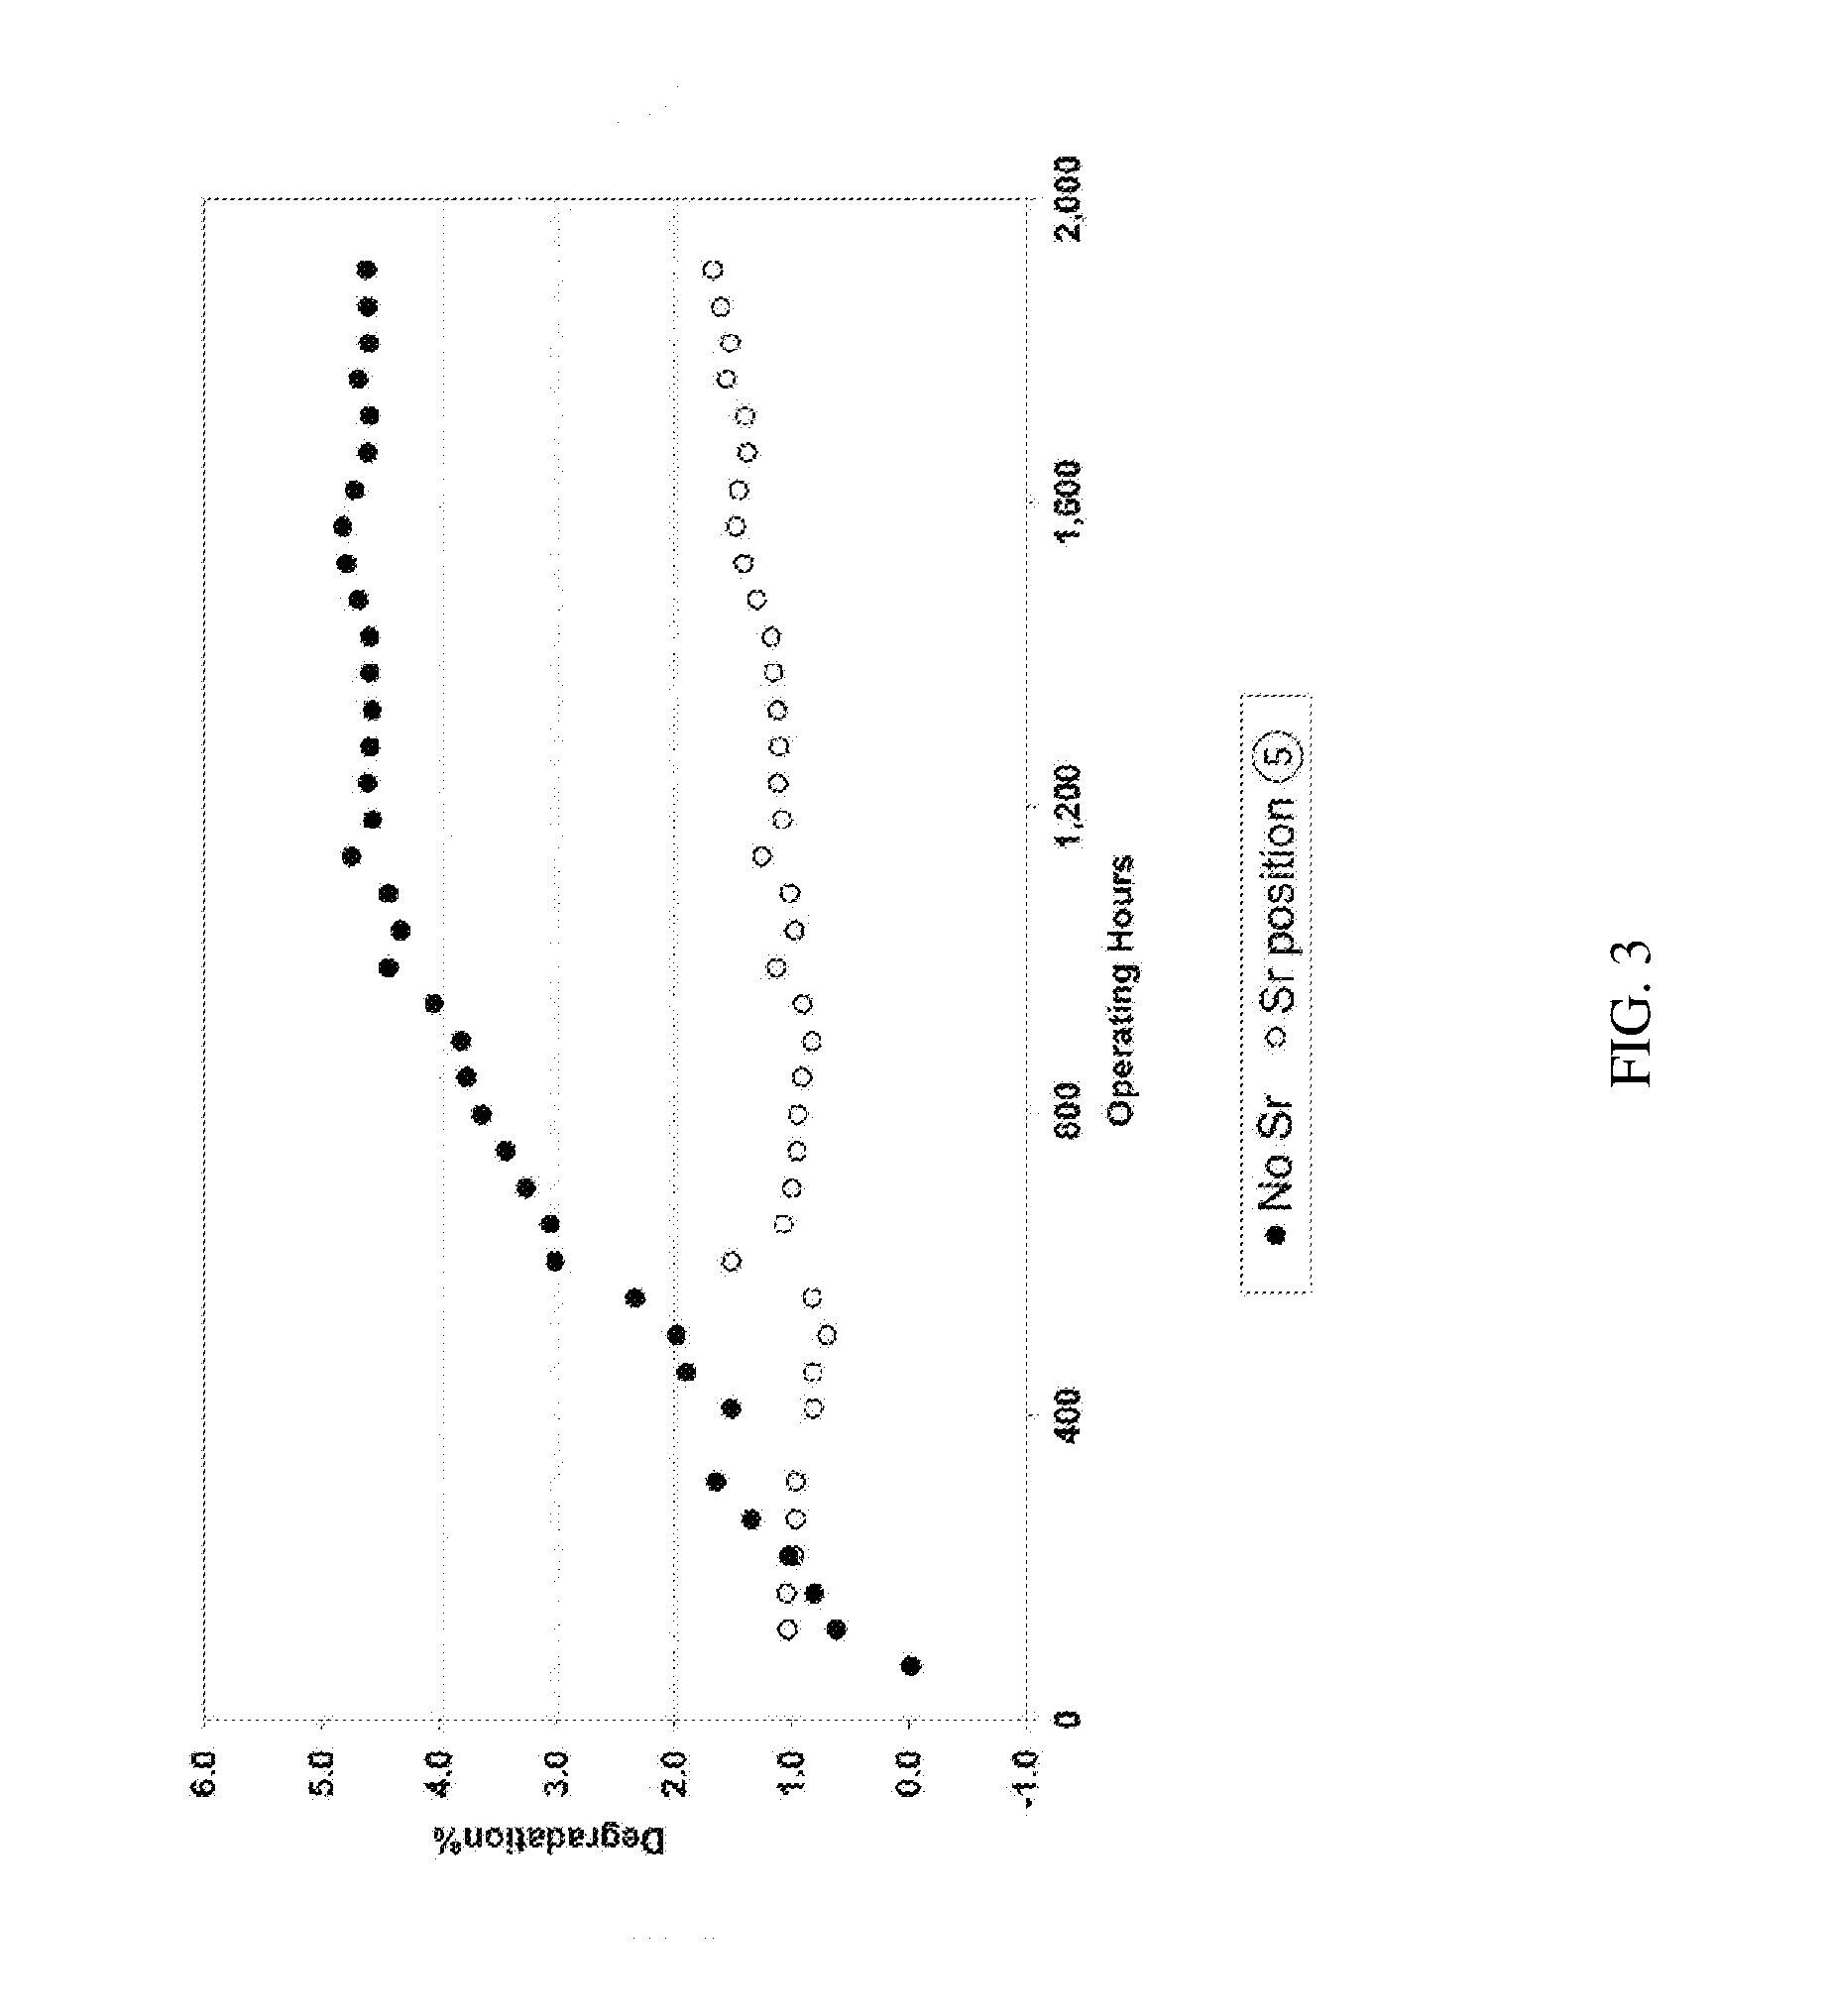 Electrochemical energy conversion devices and cells, and positive electrode-side materials for them